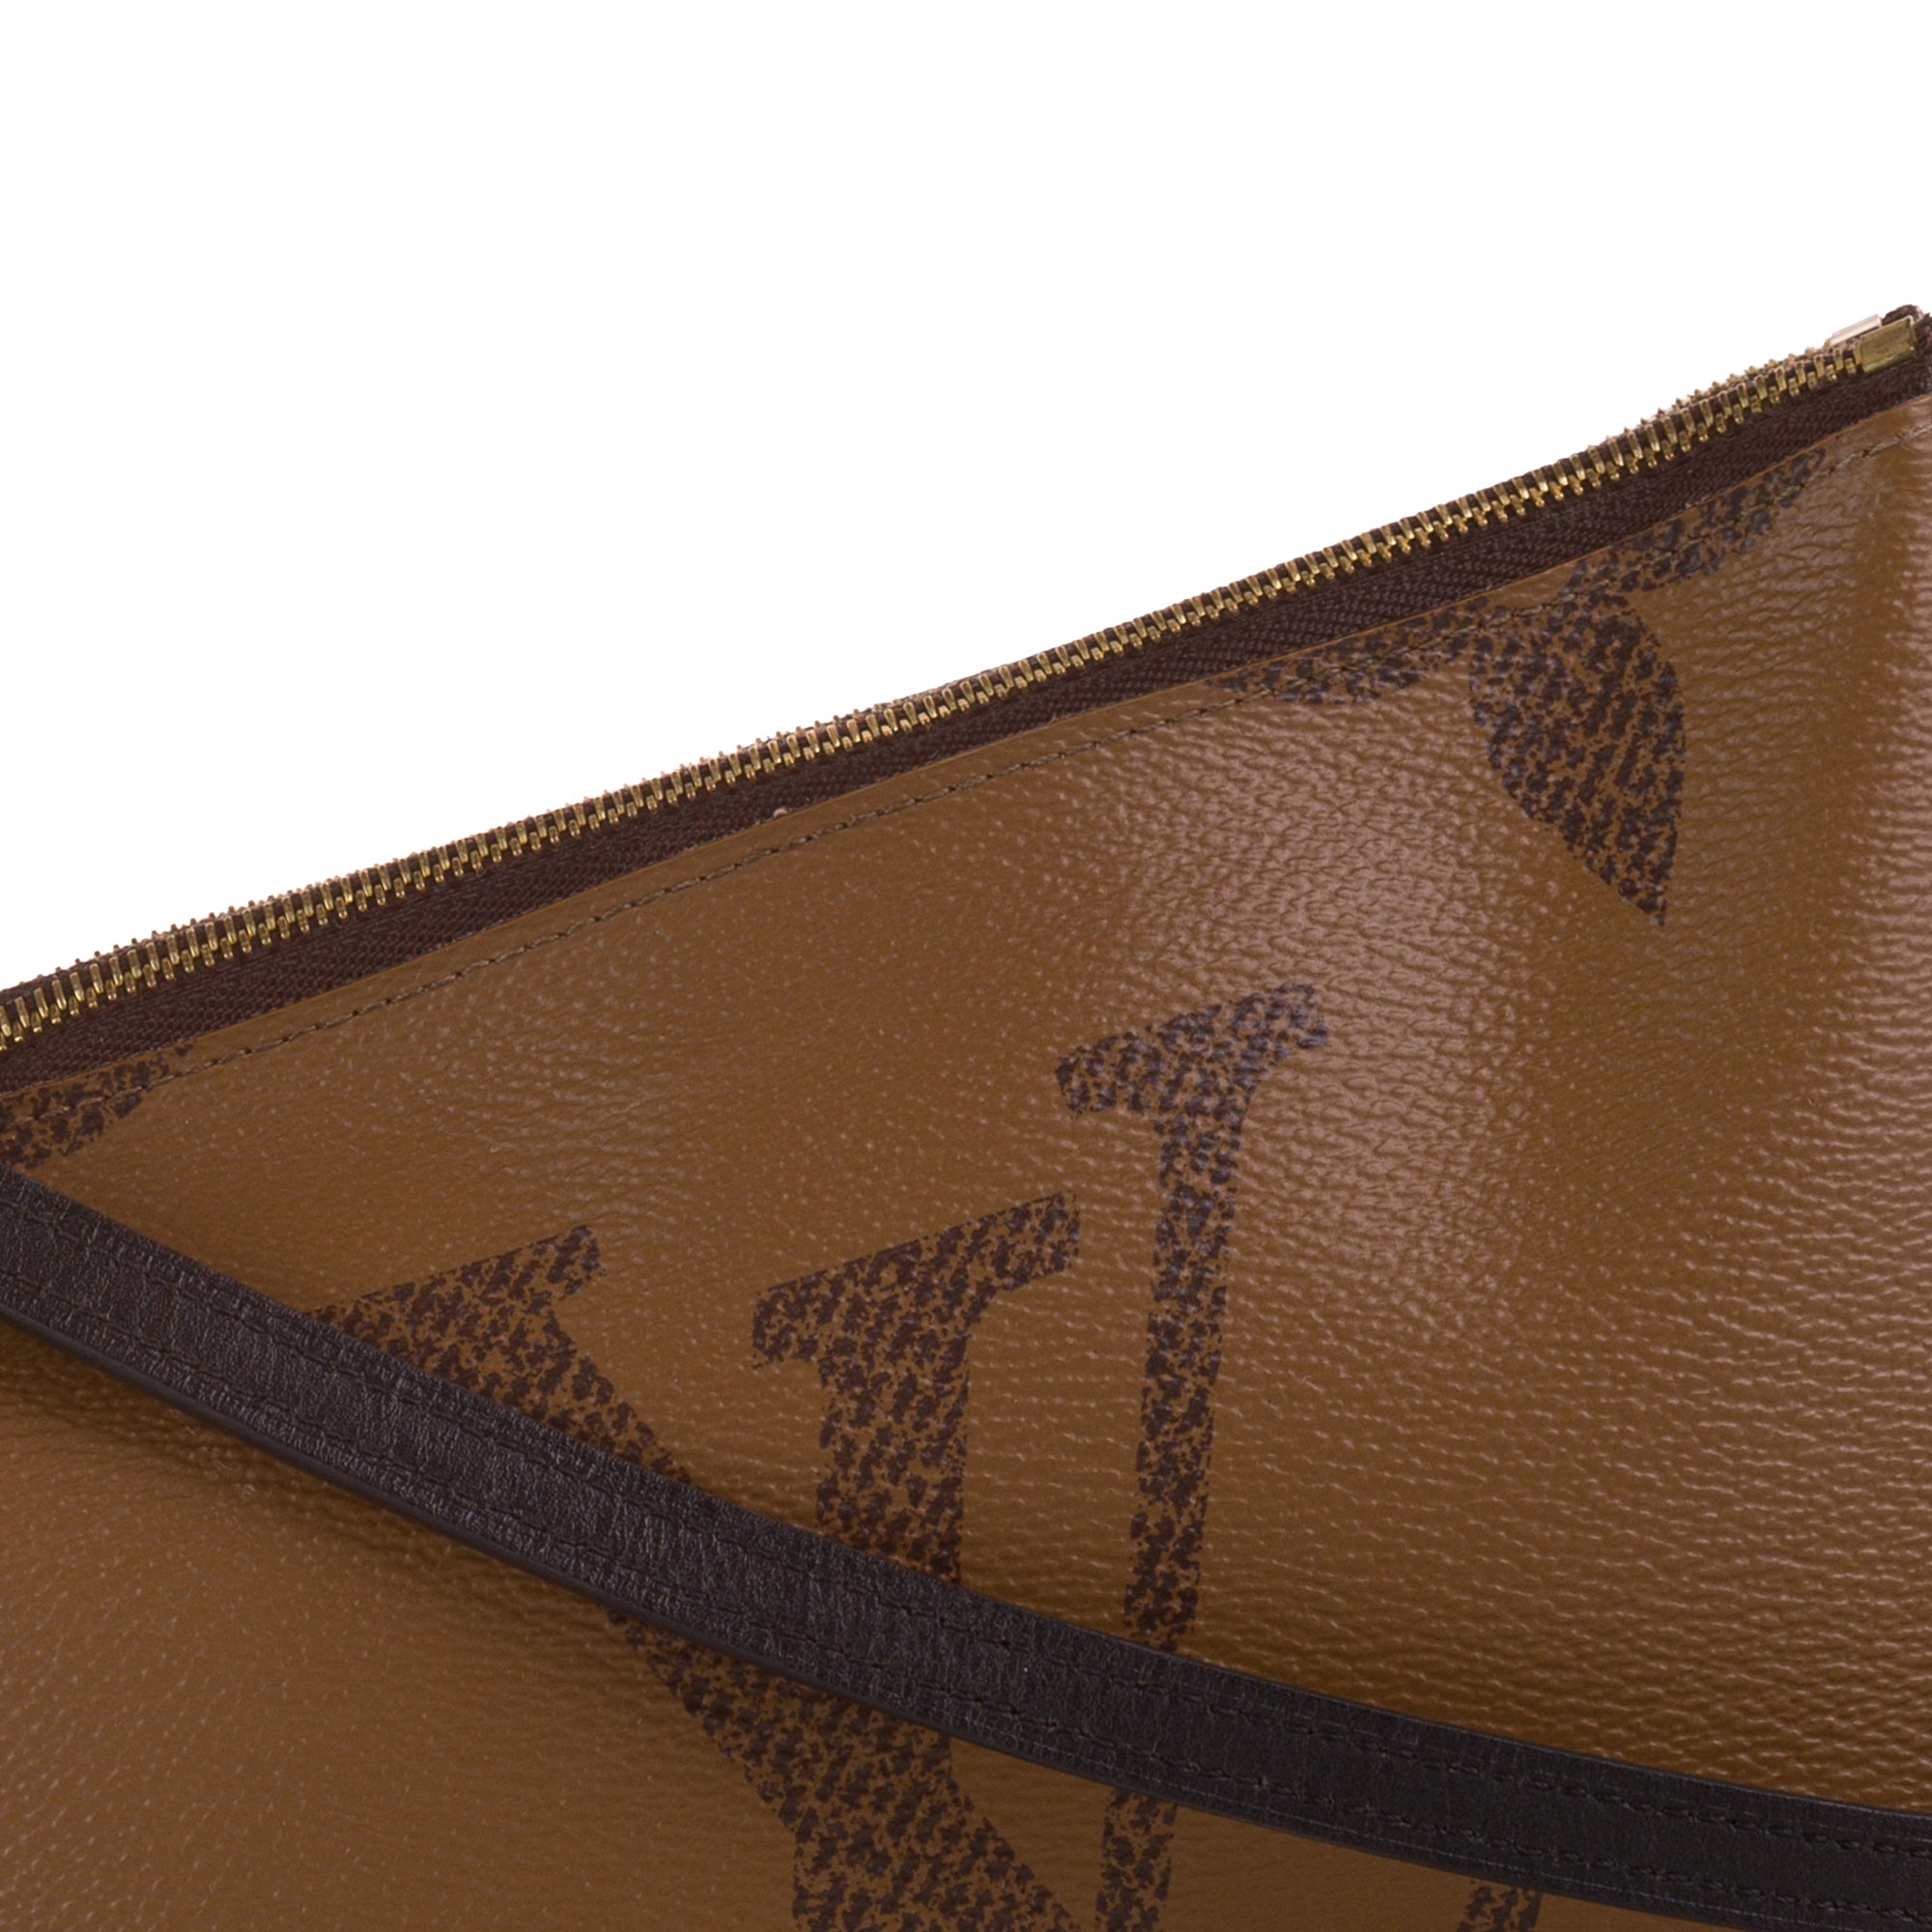 Double zip leather clutch bag Louis Vuitton Brown in Leather